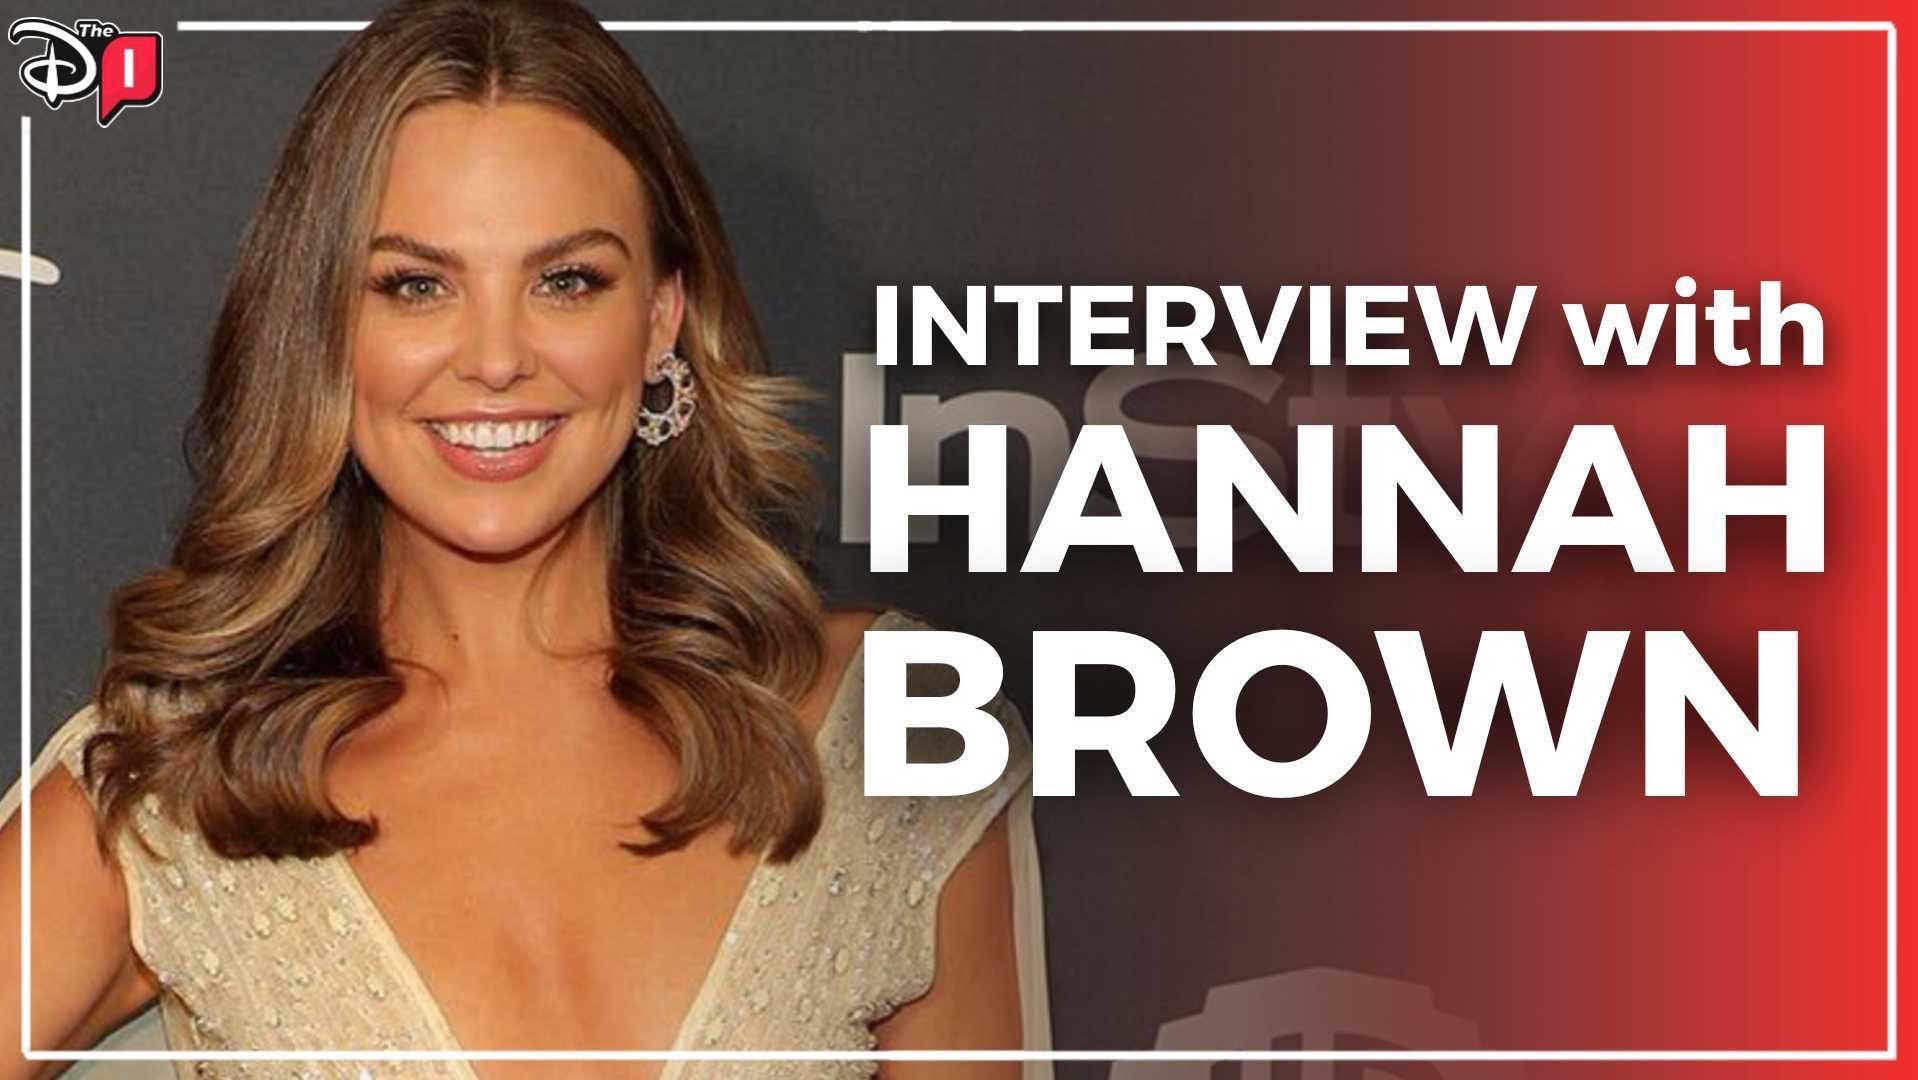 EXCLUSIVE: Former Bachelorette, ‘Dancing With The Stars’ Winner Hannah Brown Discusses Her New Book (INTERVIEW)